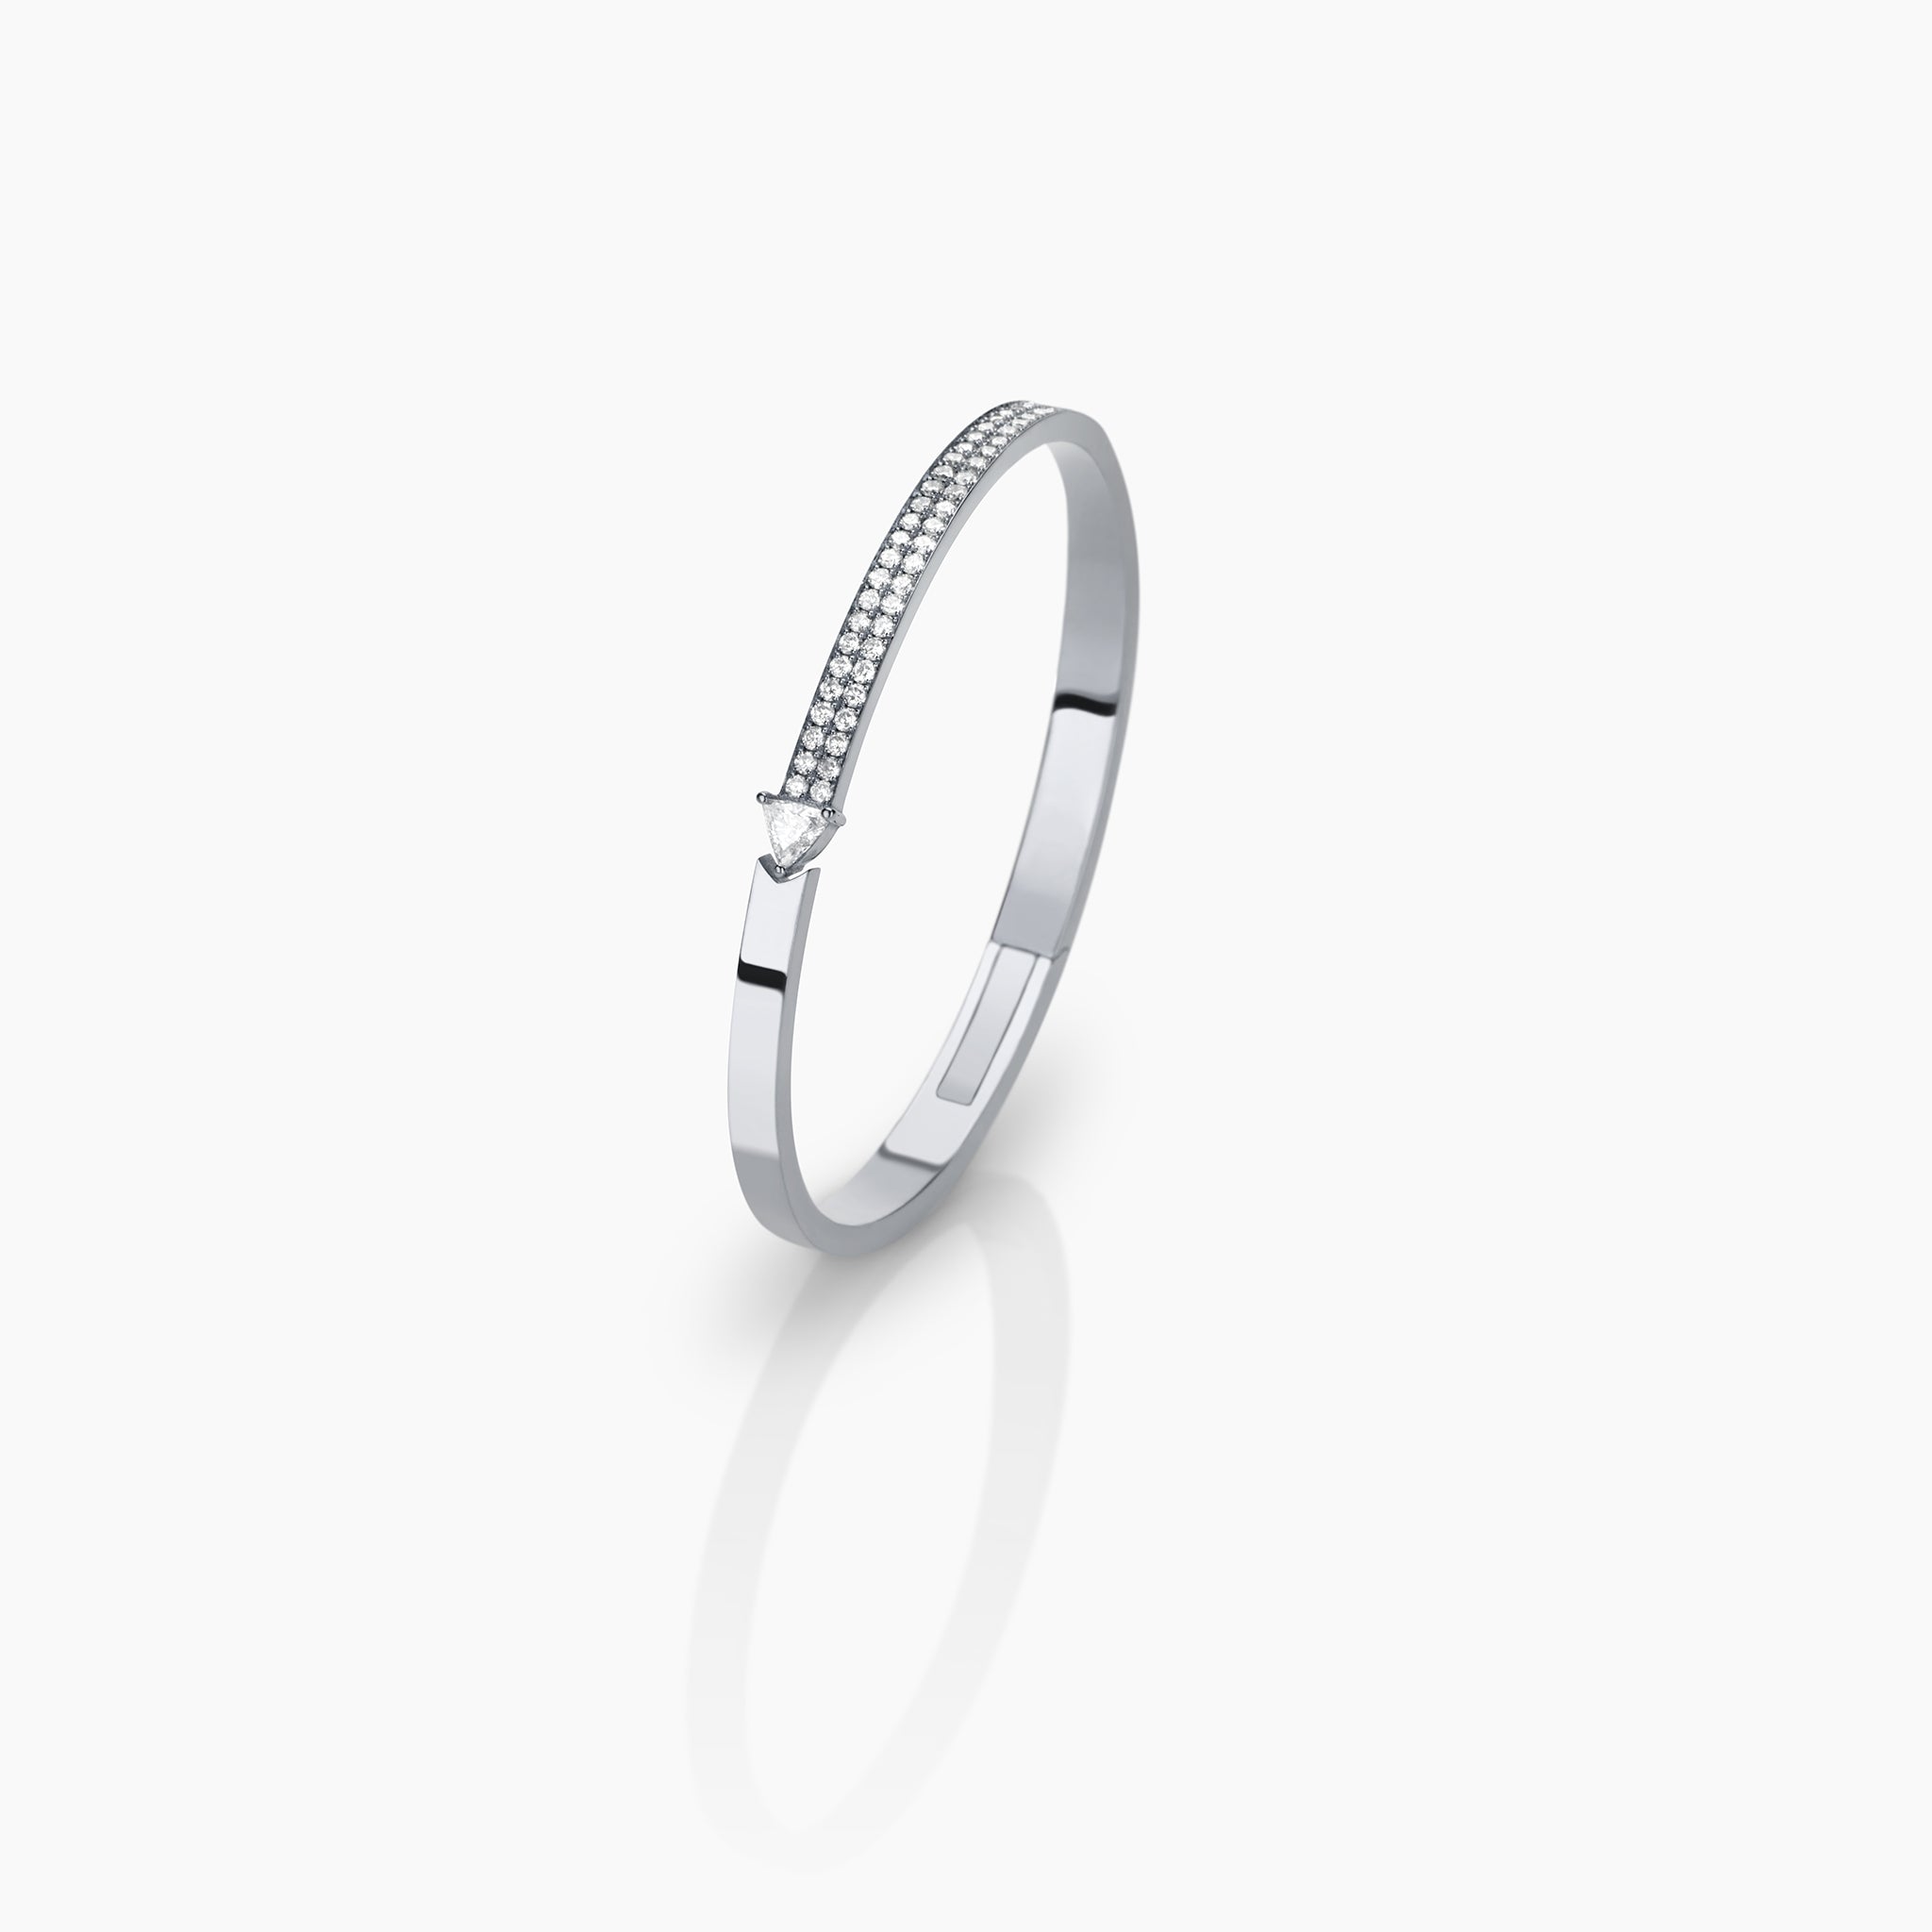 White gold bangle with diamonds set against an off white background